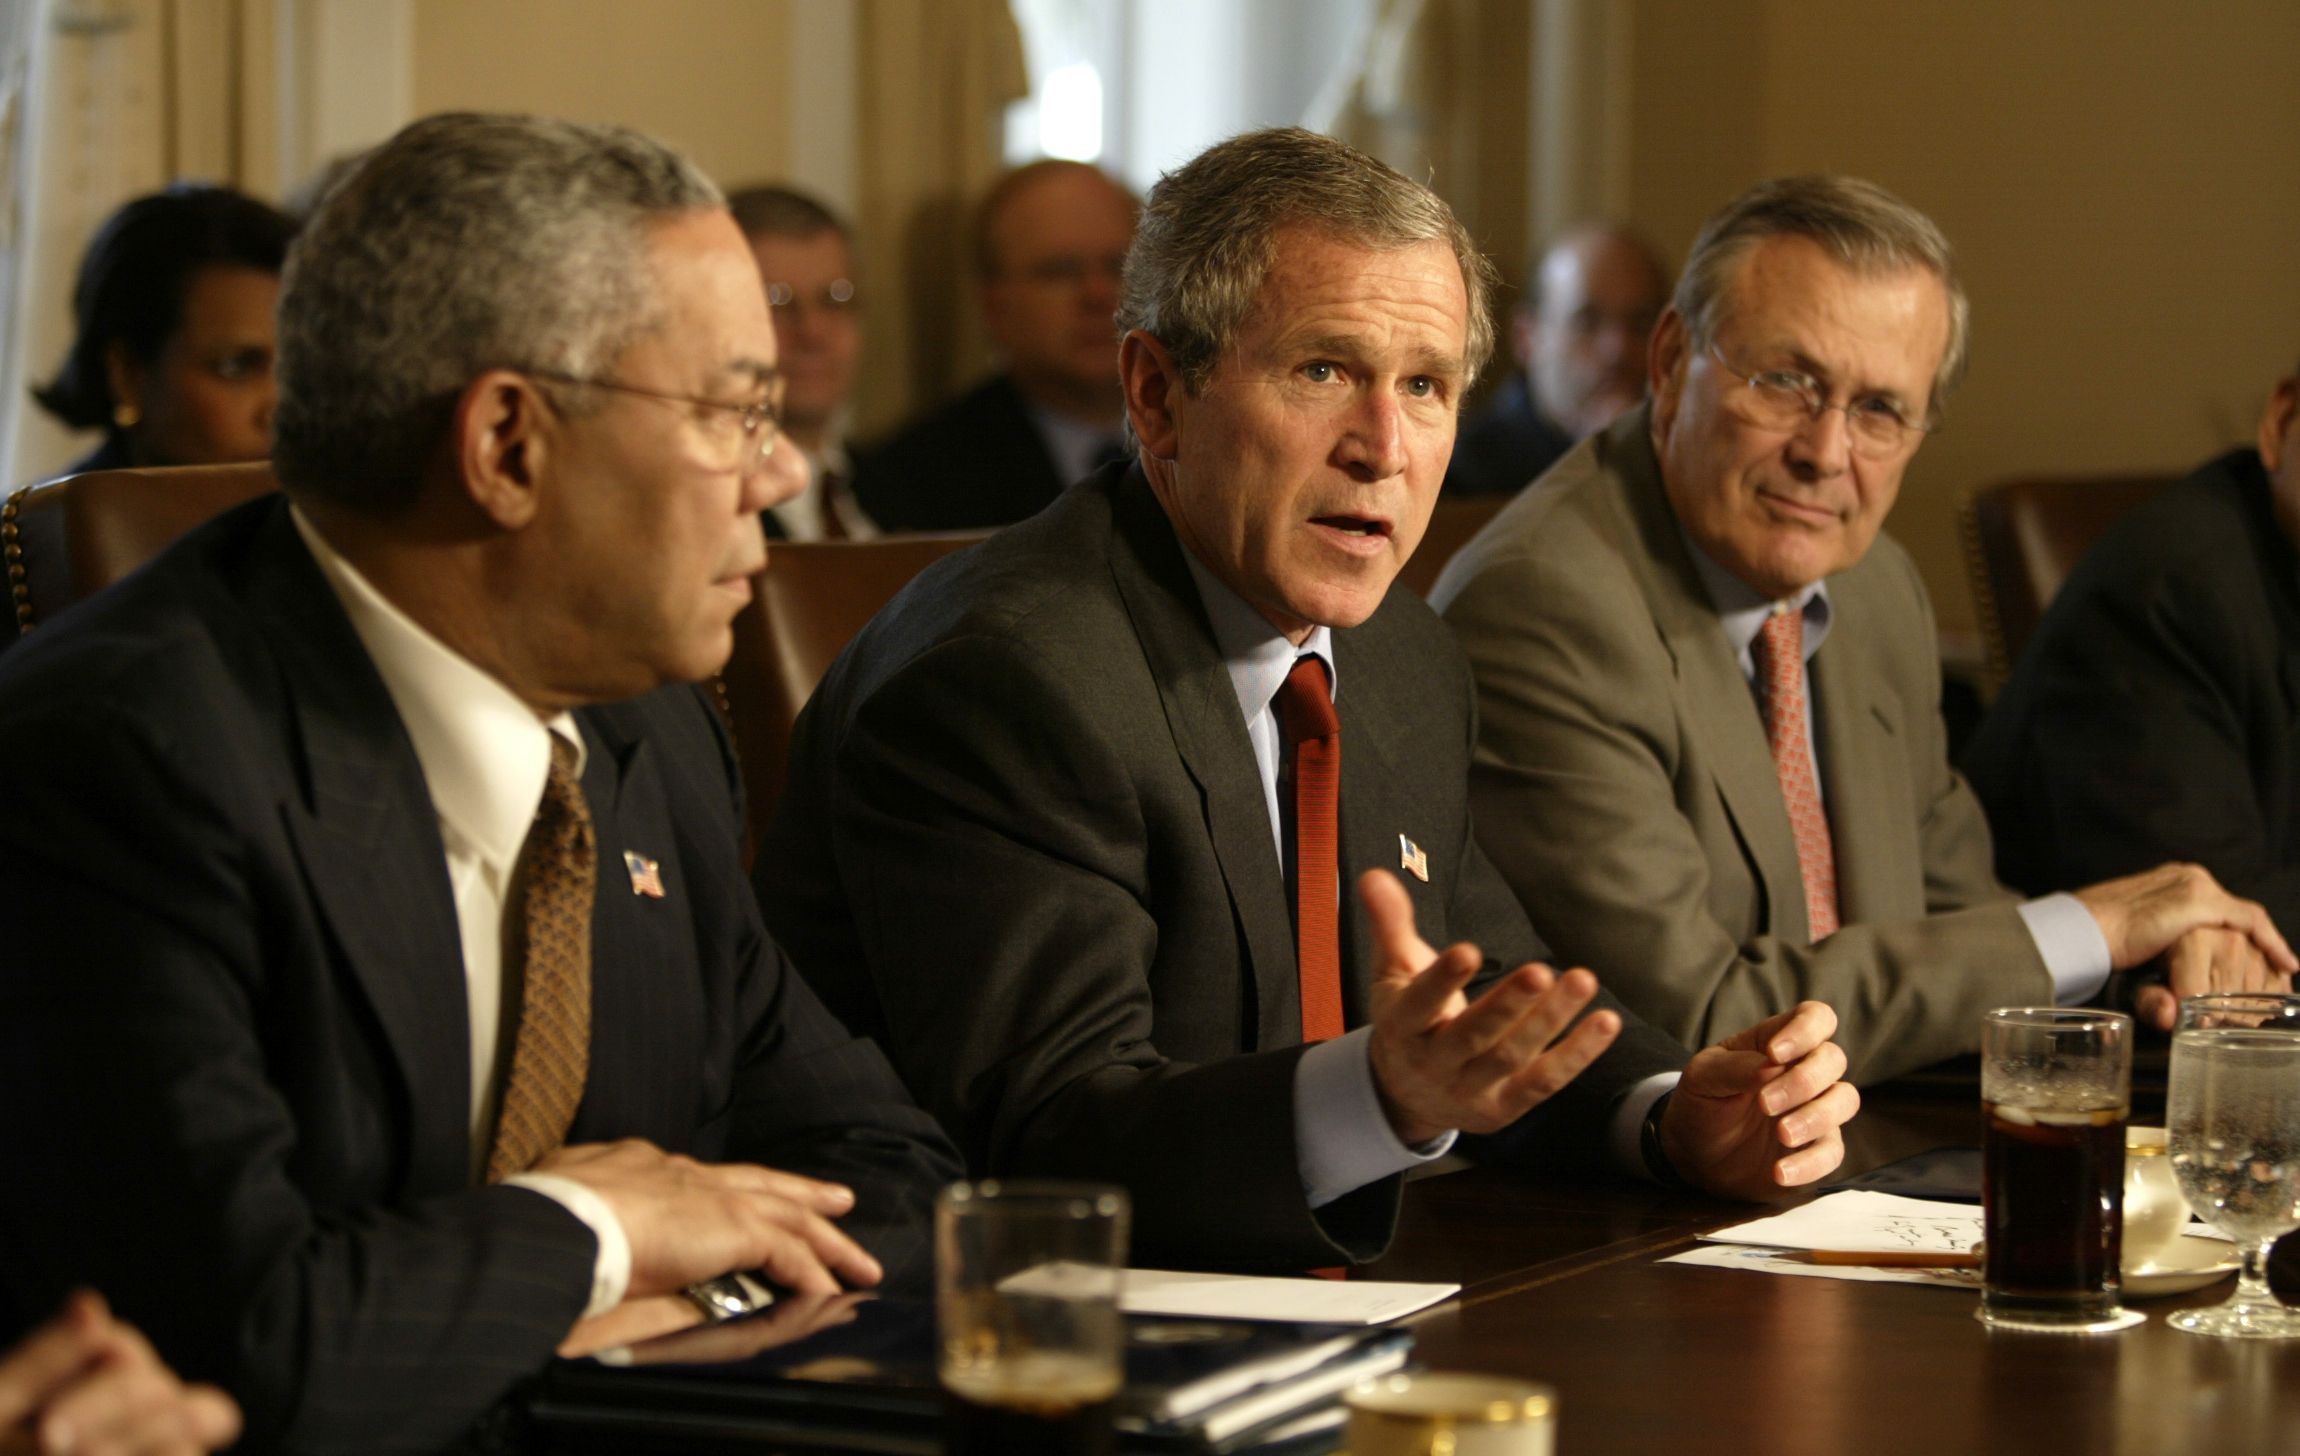 Then-President George W. Bush meets with his cabinet at the White House, including Secretary of State Colin Powell (L) and Secretary of Defense Donald Rumsfeld in 2002. 